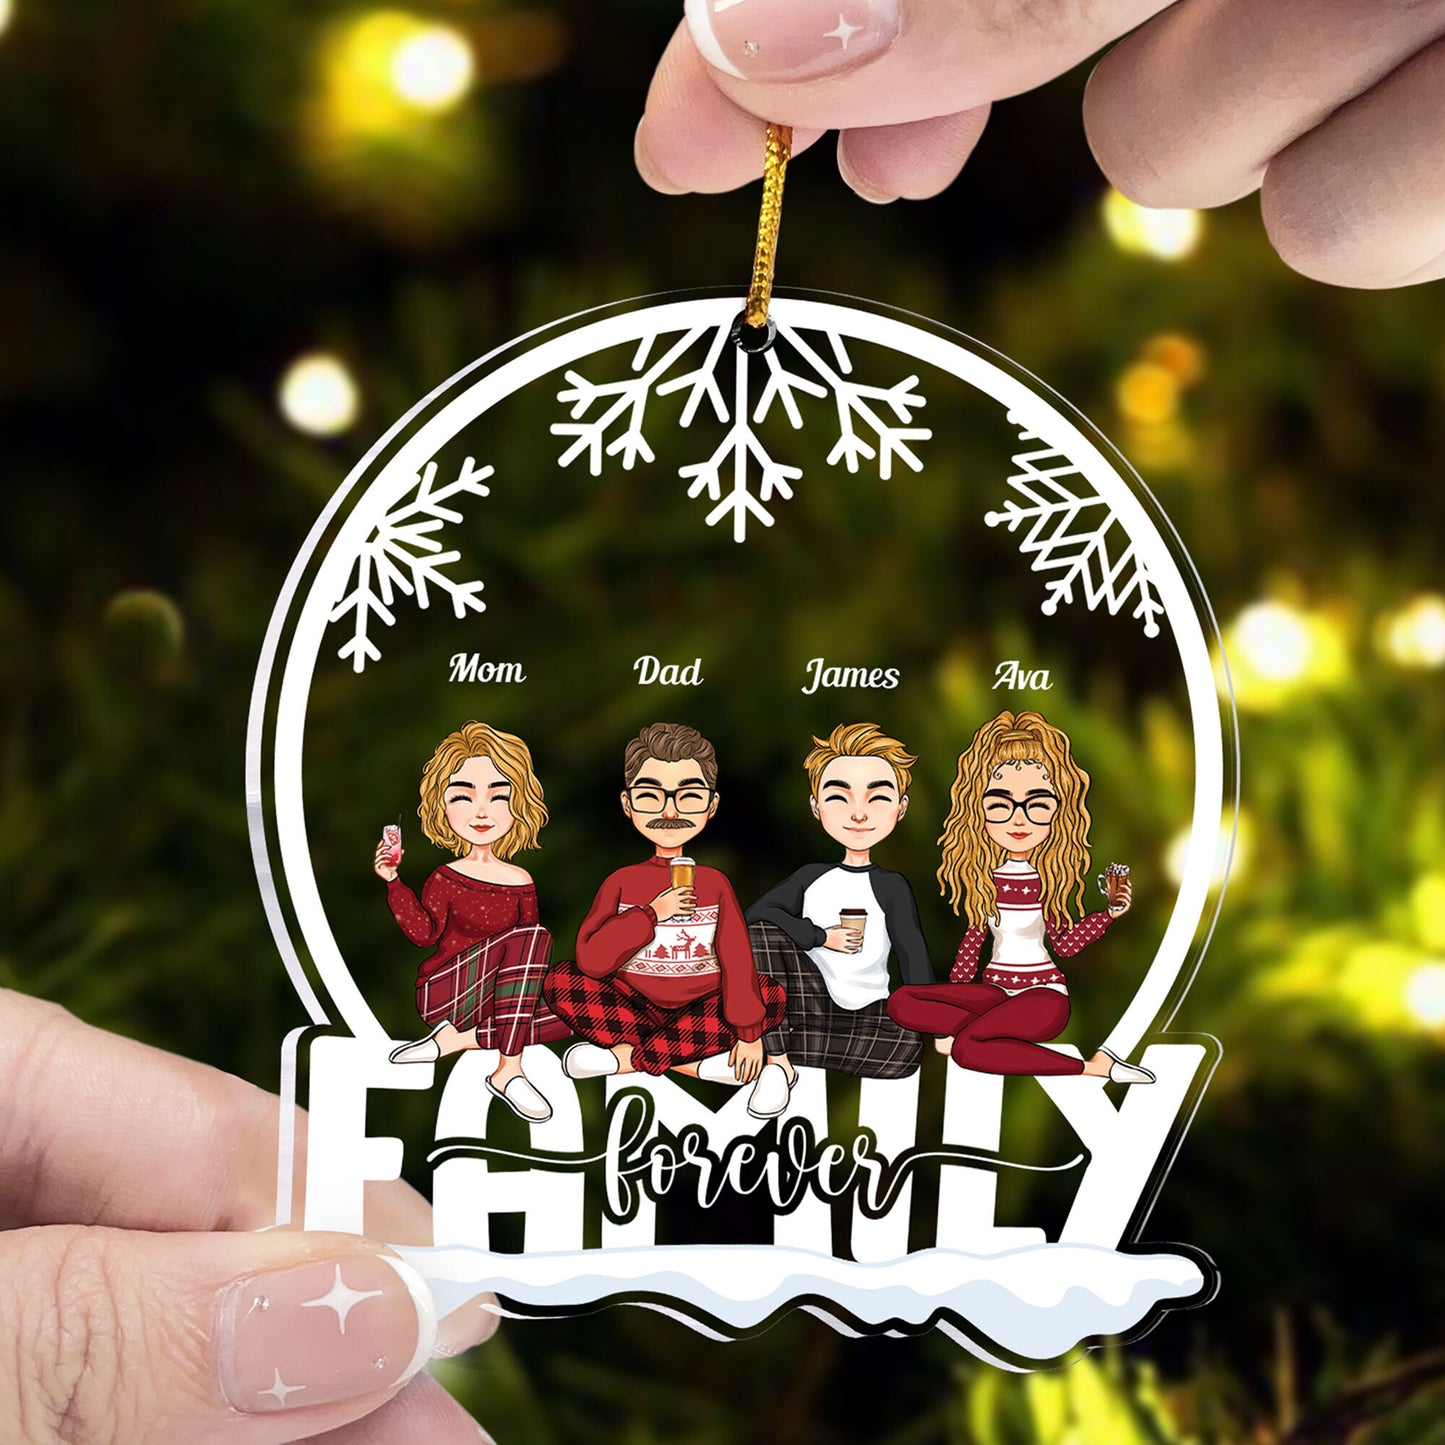 Siblings Forever - Personalized Custom Shaped Acrylic Ornament - Christmas Gift For Family, Dad, Mom, Sisters, Brothers